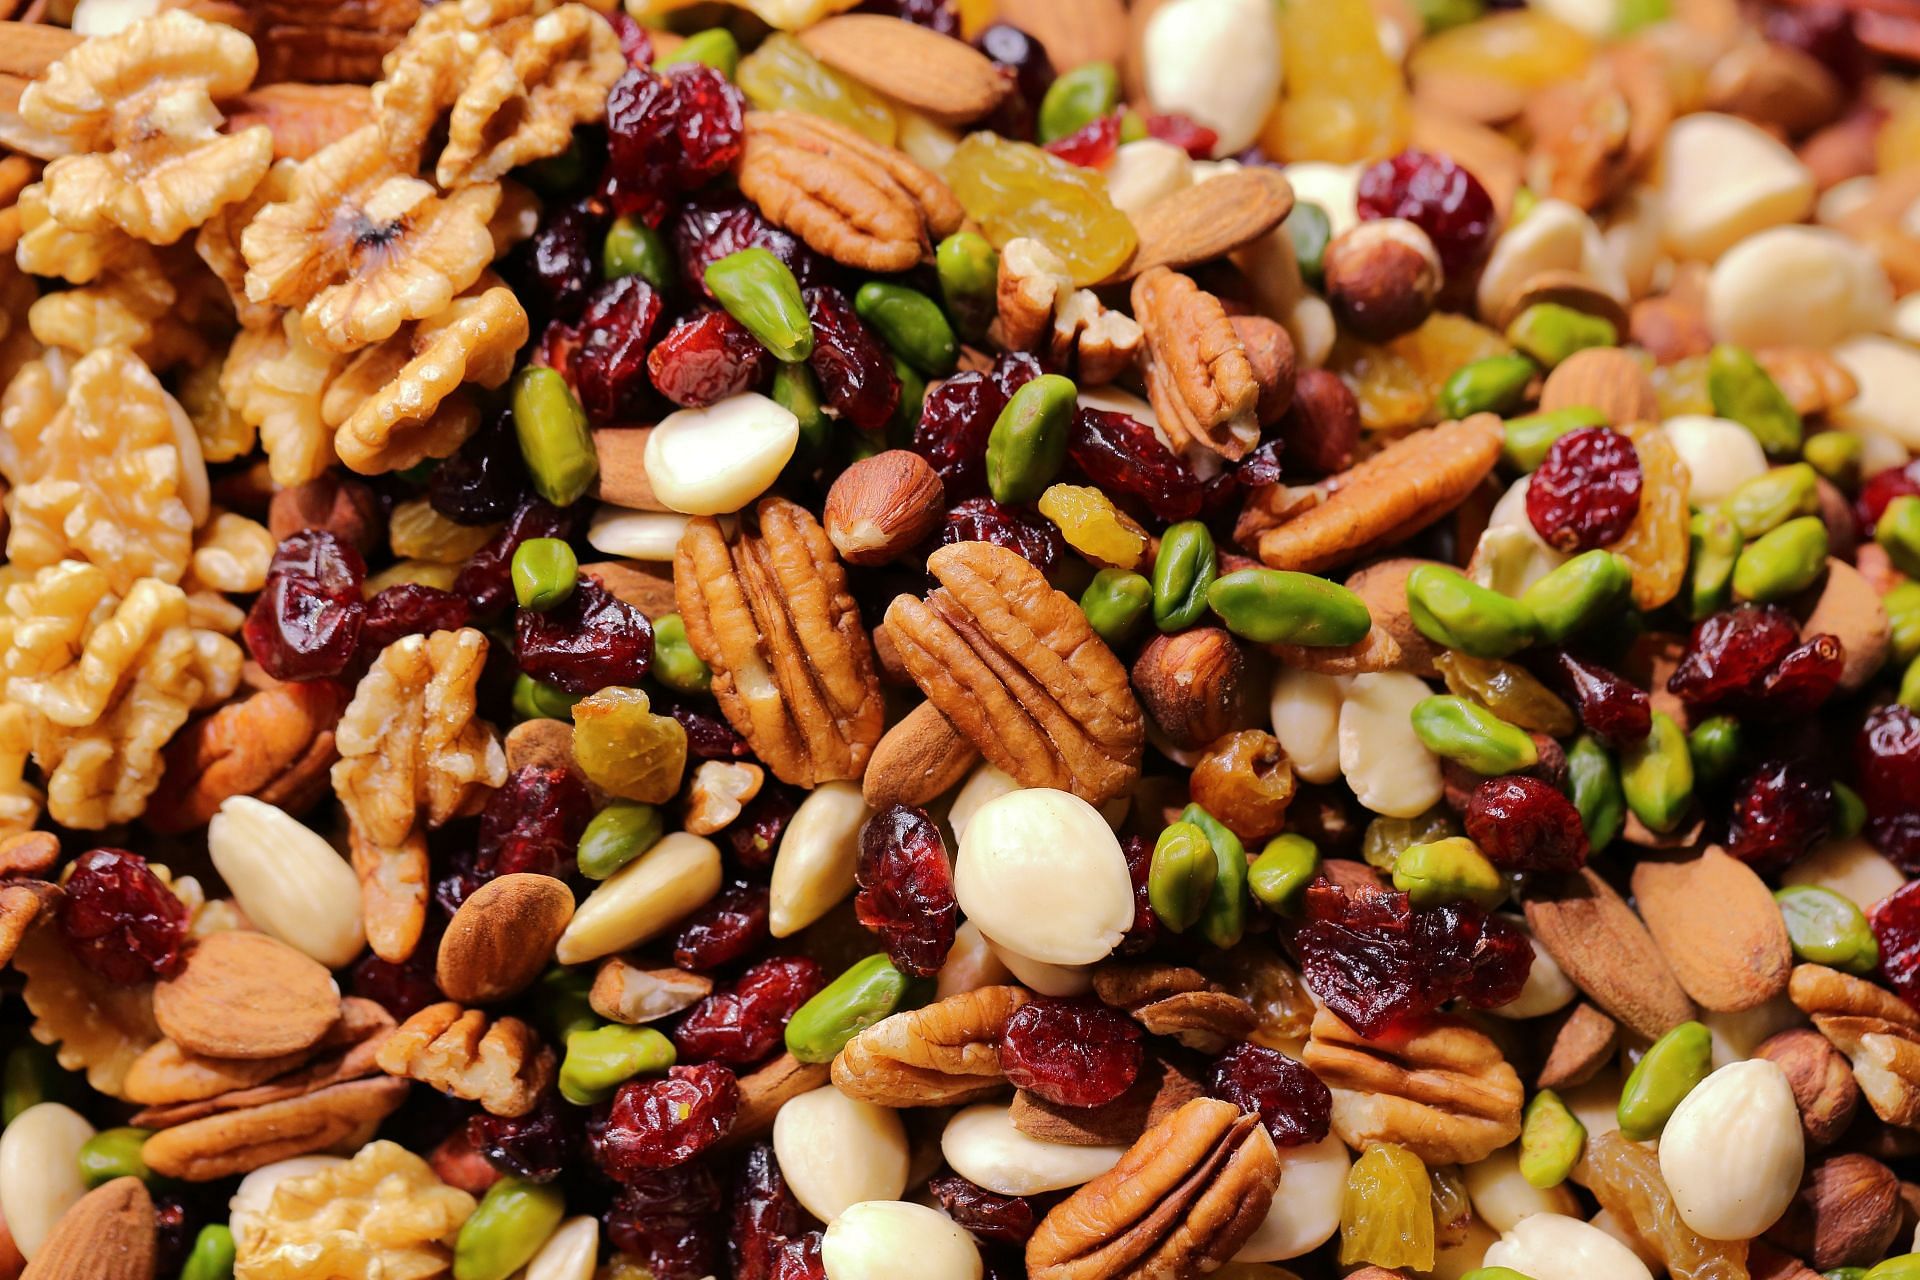 Trail mixes are an amazing way to include walnuts in your diet. (Image via Unsplash/Maksim Shutov)